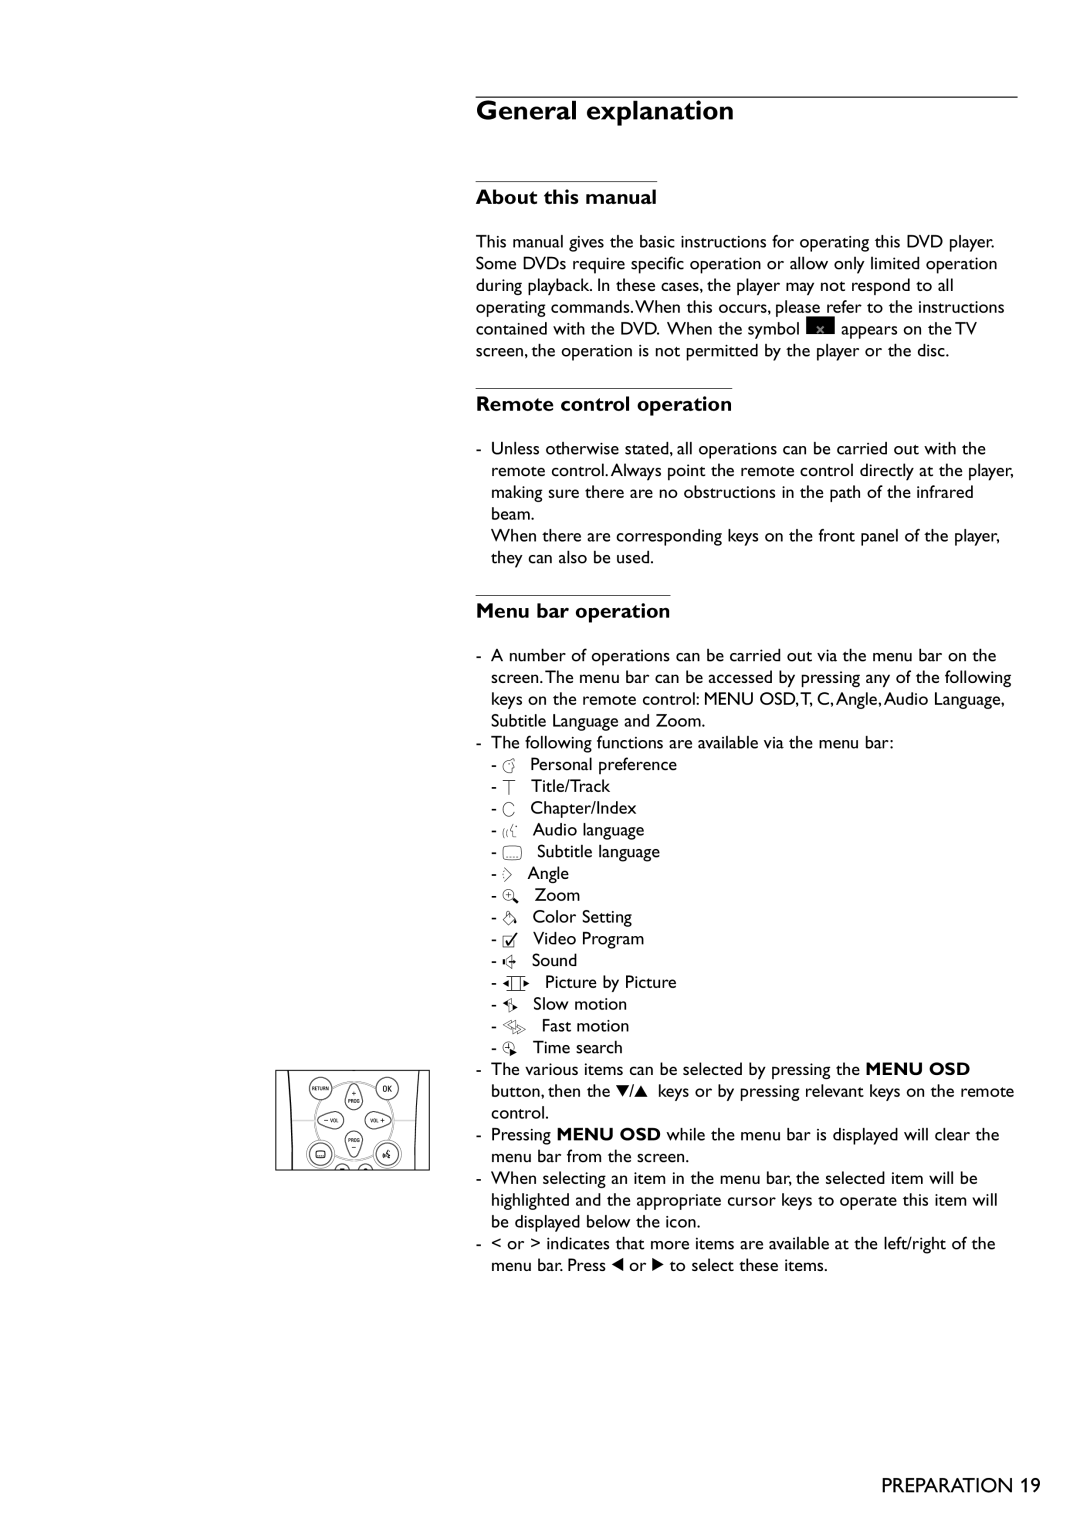 Philips DVD751 General explanation, About this manual, Remote control operation, Menu bar operation, Preparation 